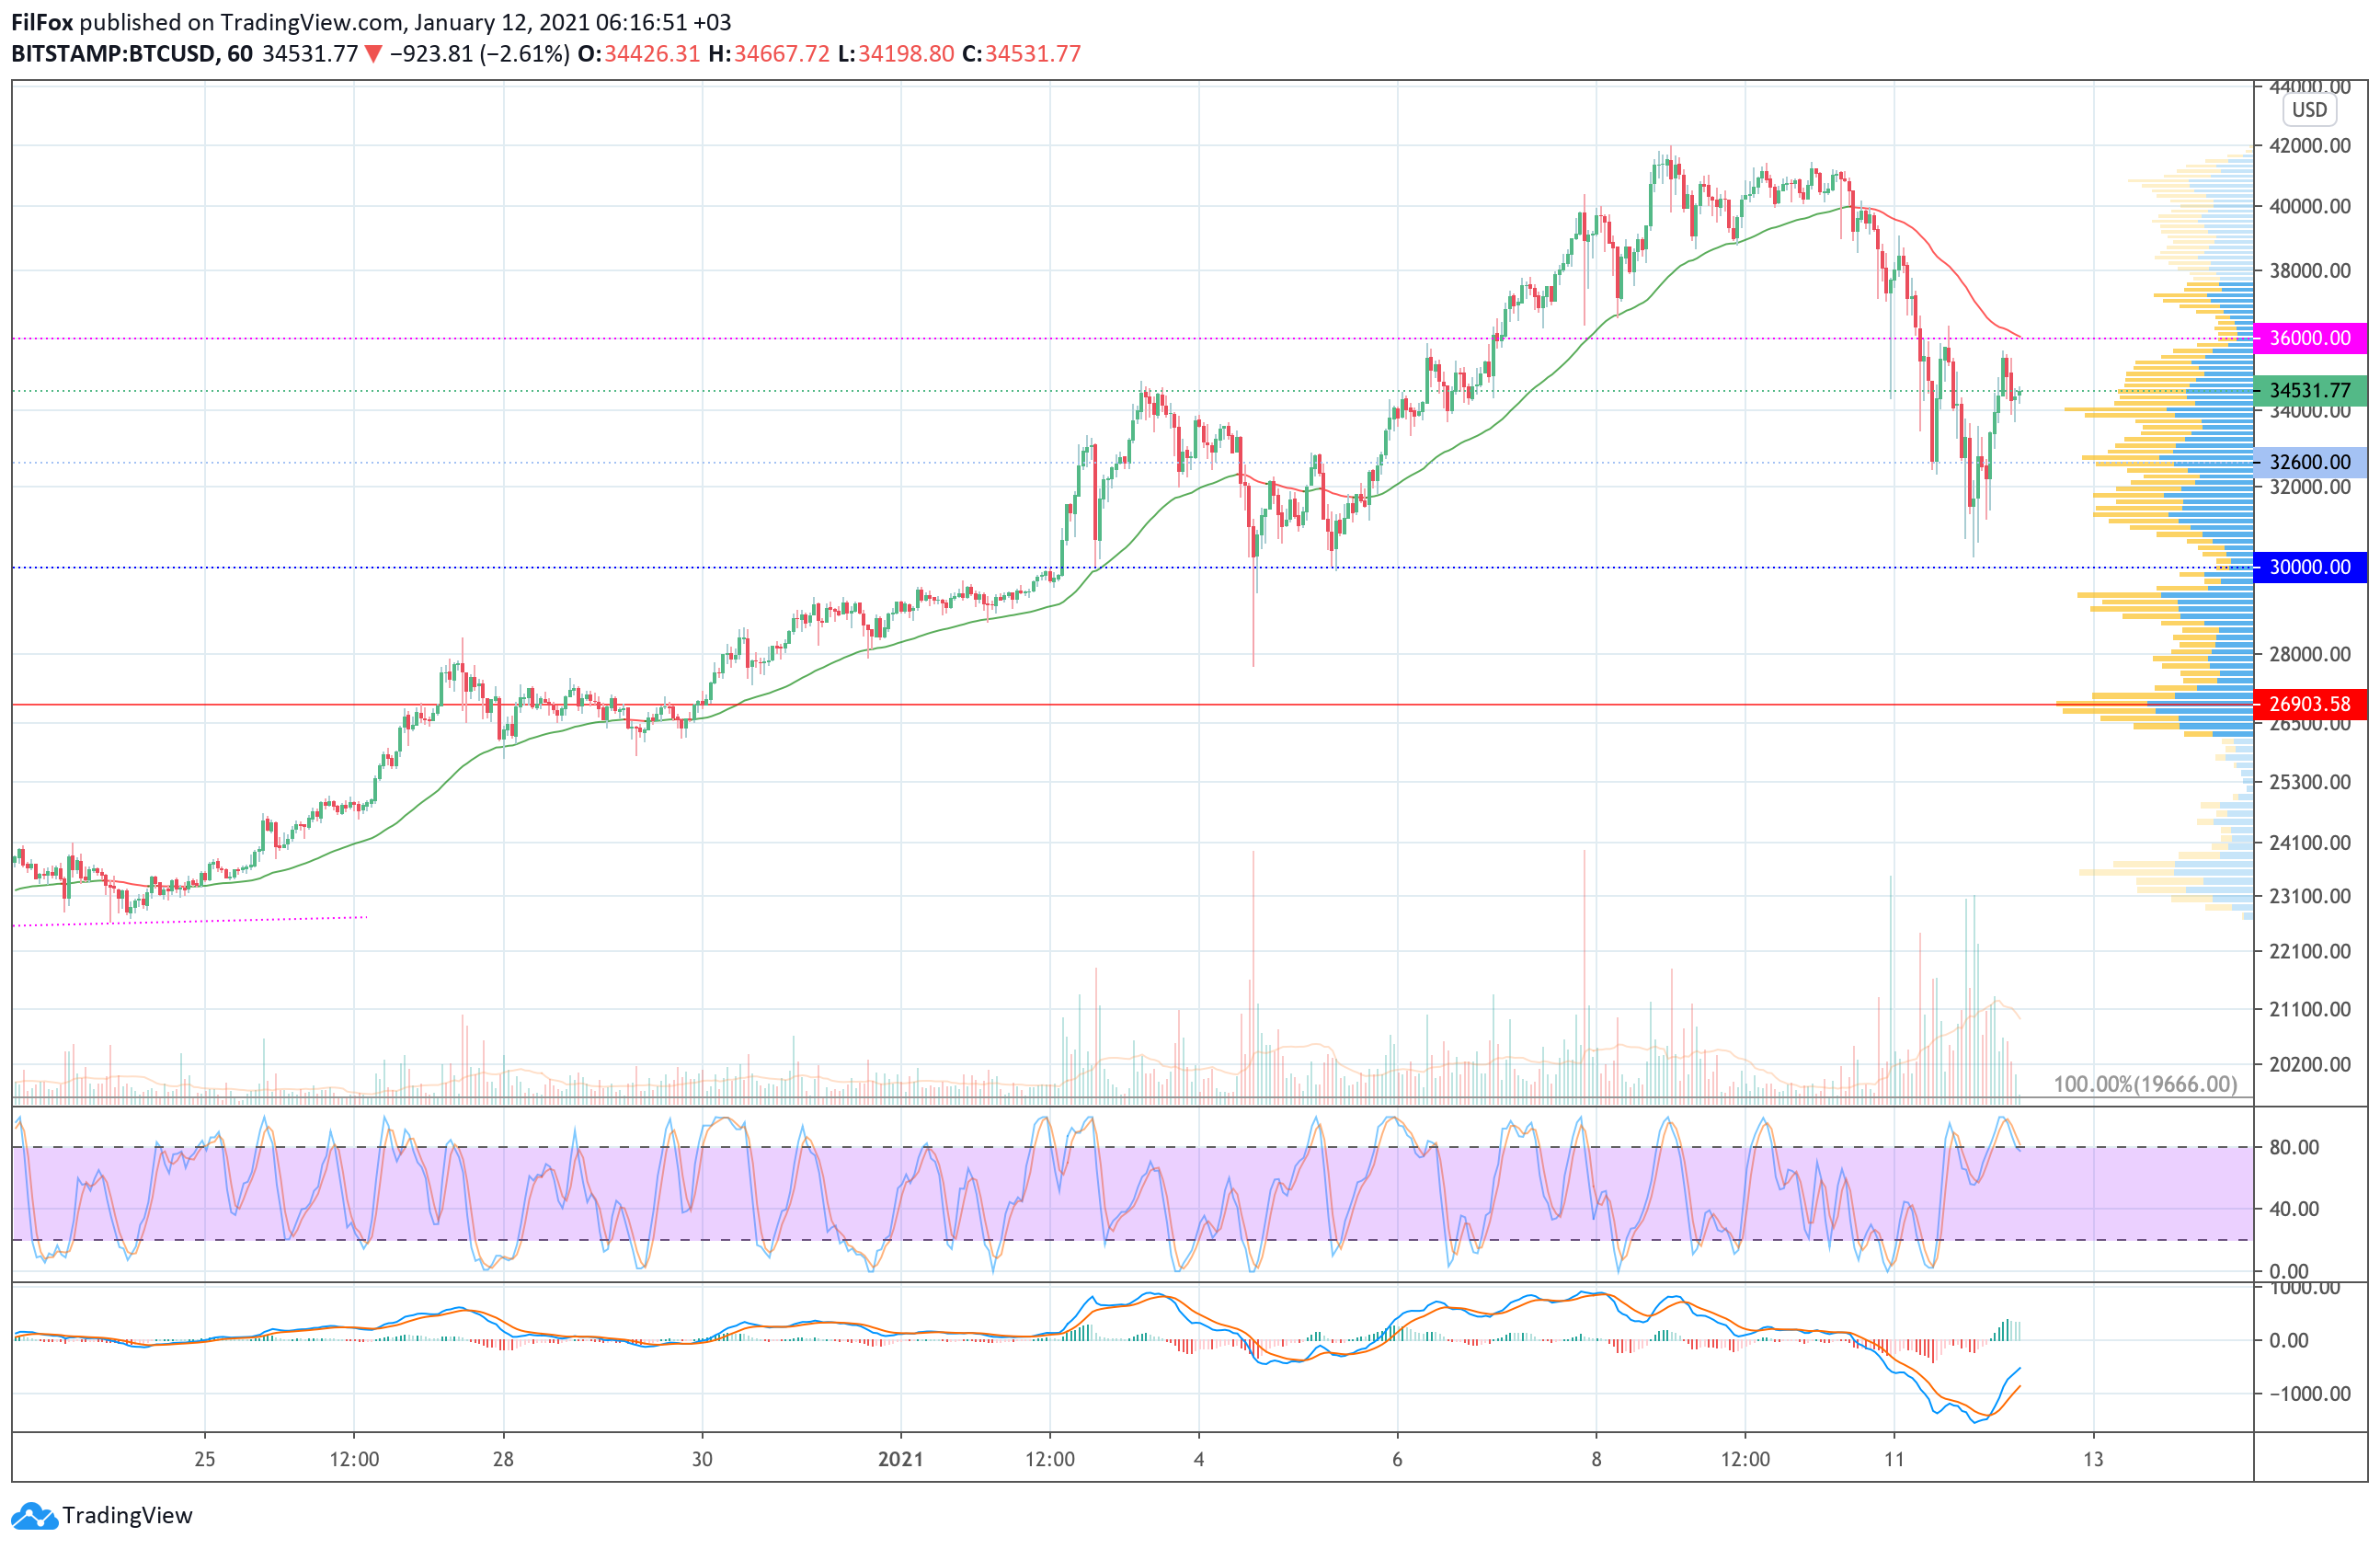 Analysis of prices for Bitcoin, Ethereum, Ripple for 01/12/2021